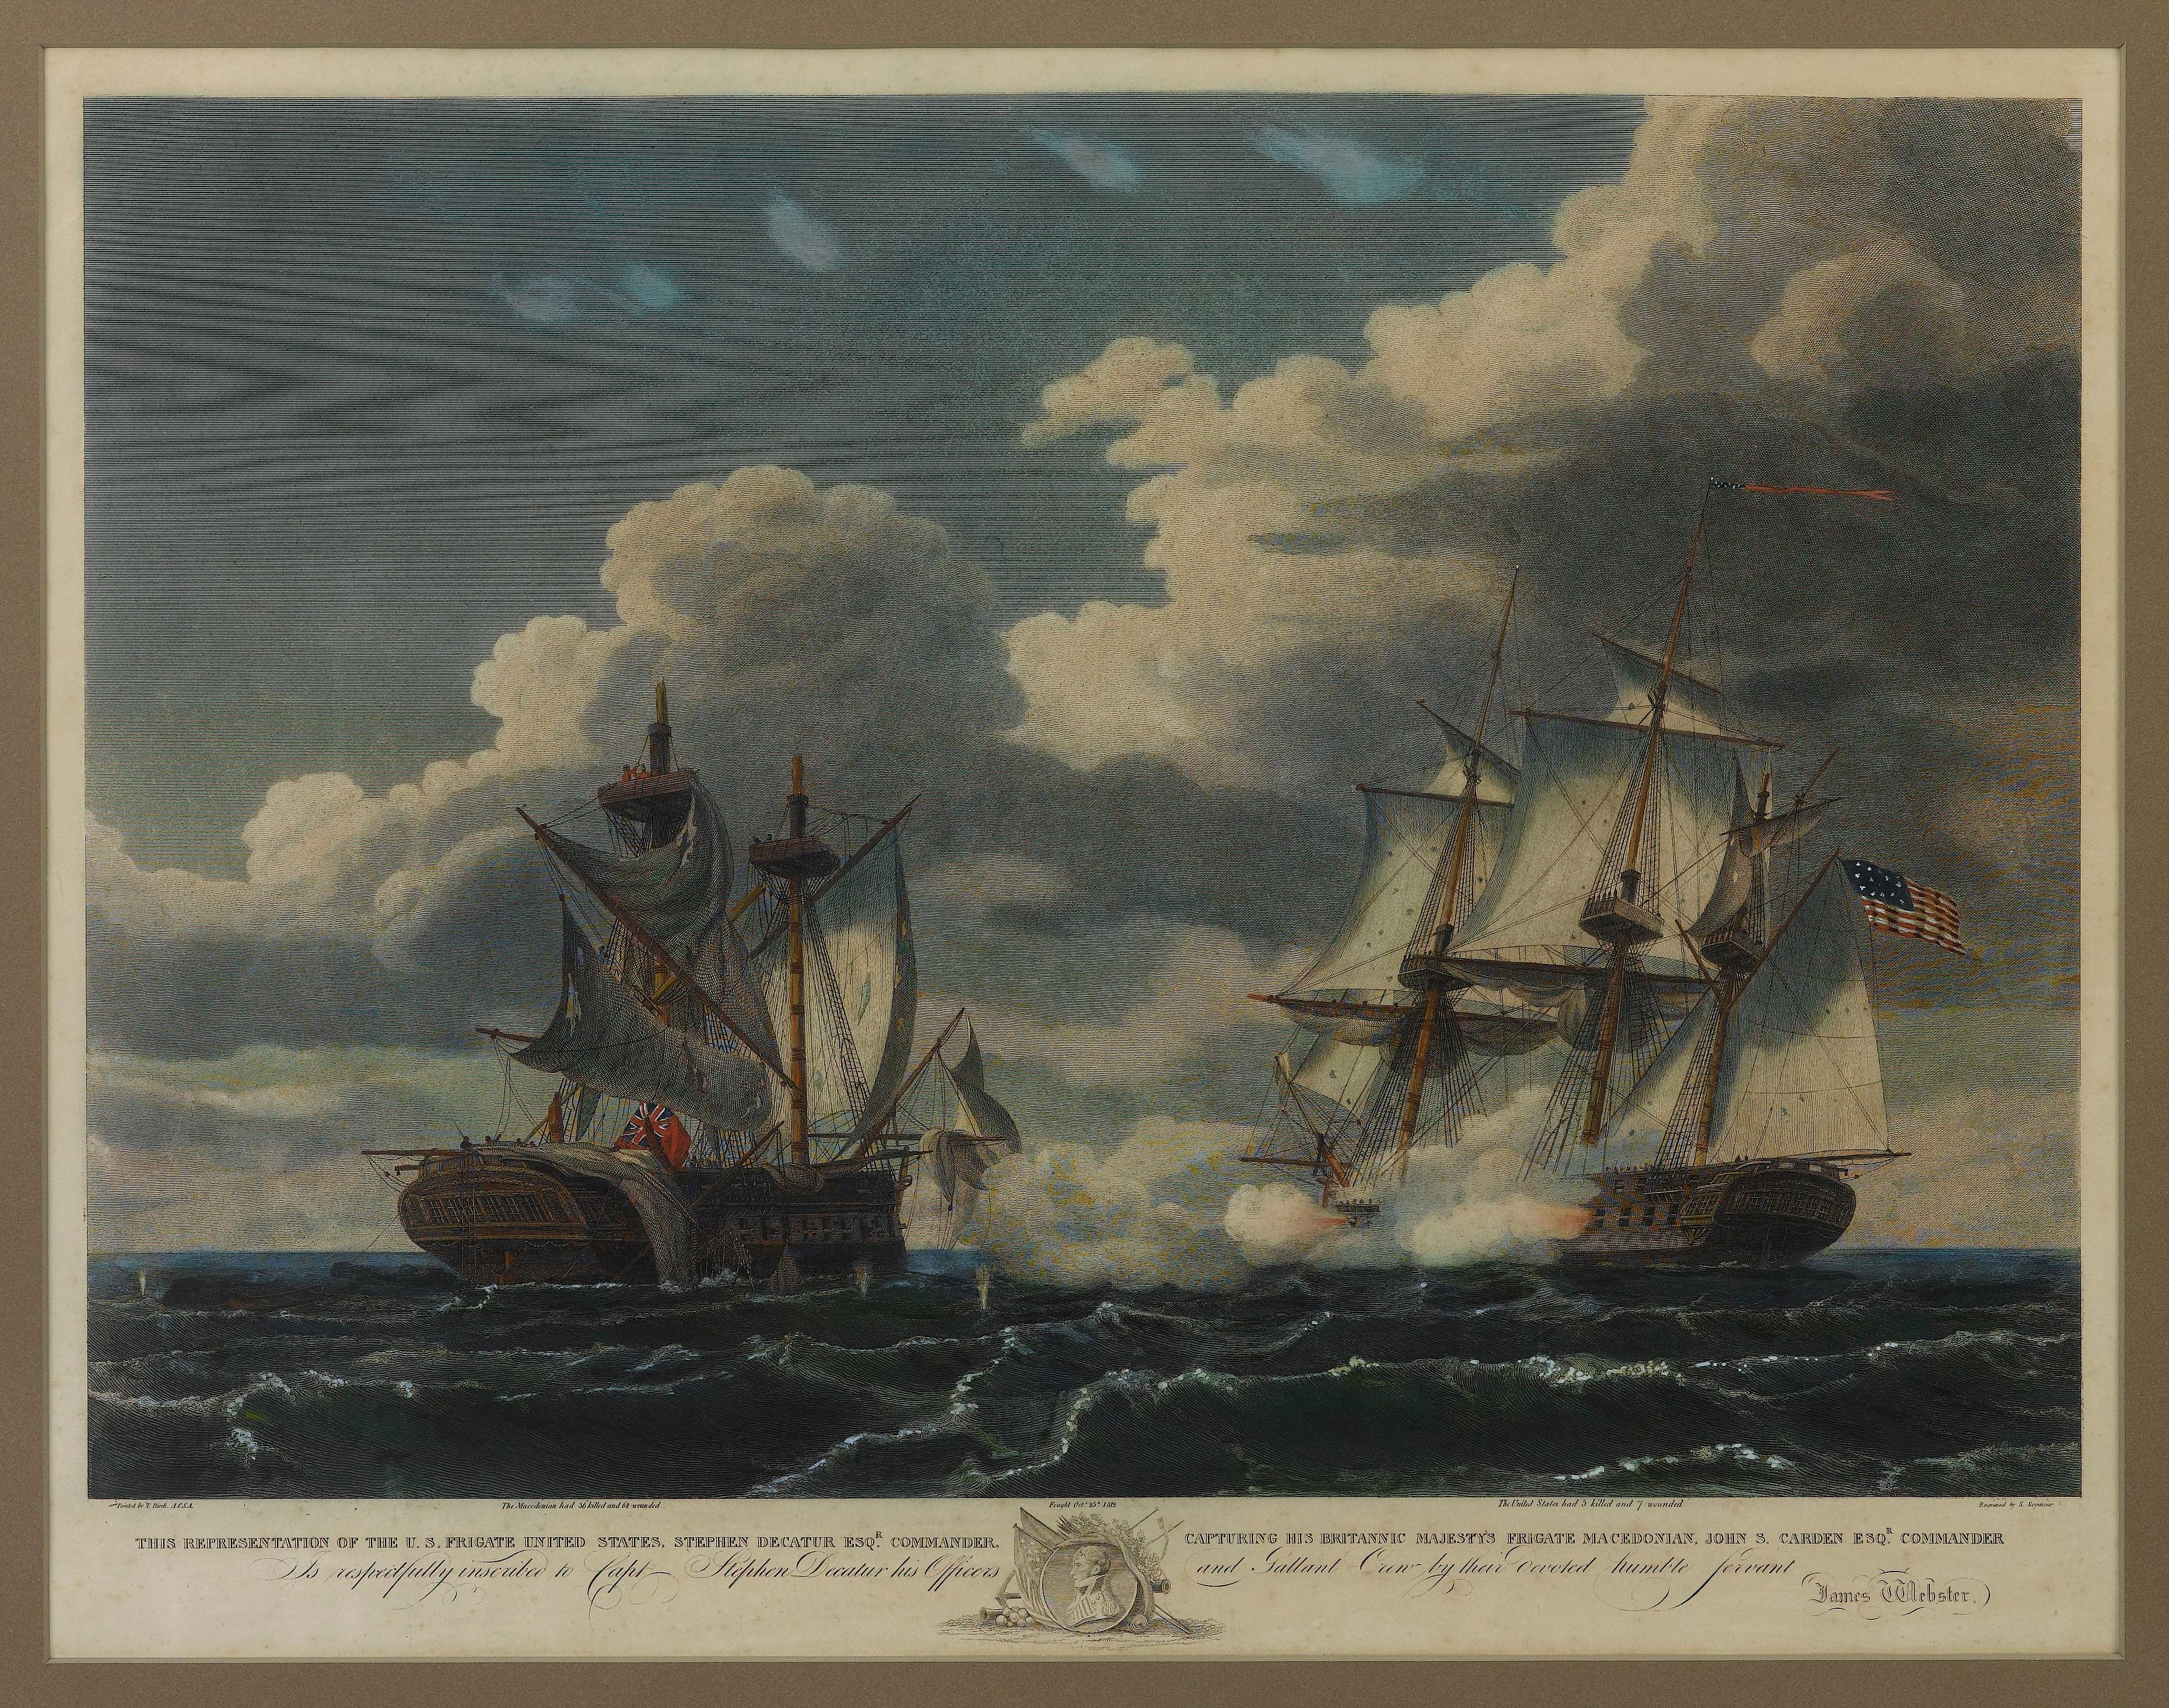 Presented is an 1815 engraving by Samuel Seymour, entitled The U.S. Frigate United States Capturing His Britannic Majesty's Frigate Macedonian. The print is after a similarly-titled oil painting, engagement between the United States and the